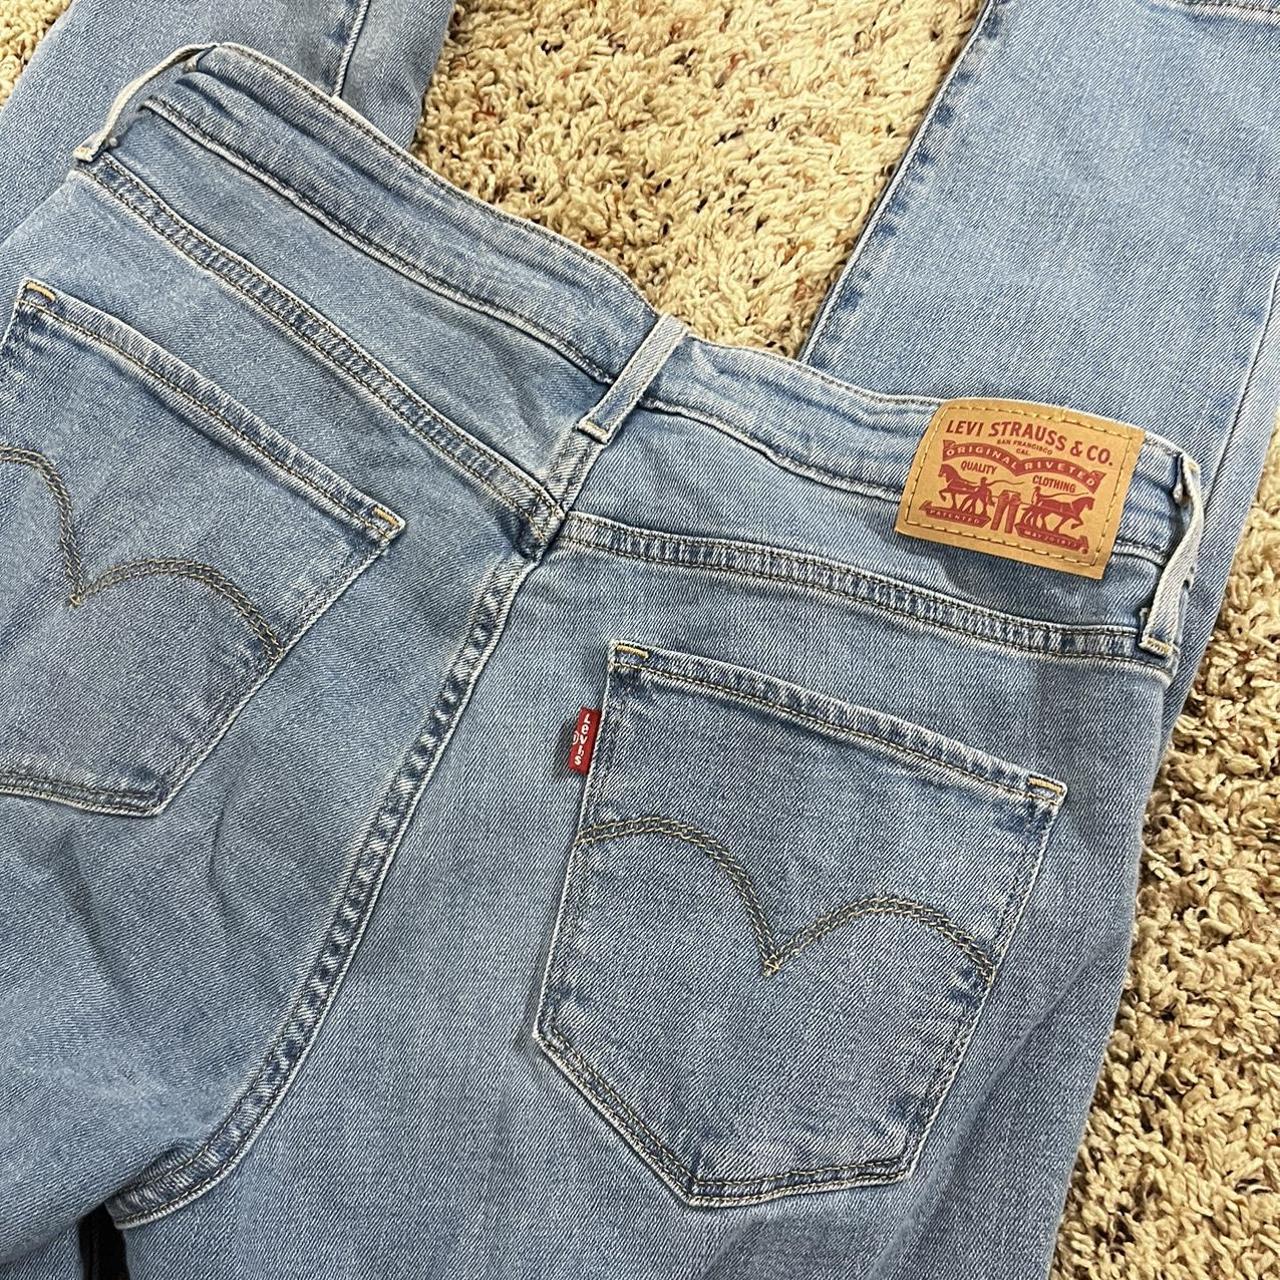 Levi's high rise skinny jean. Super comfortable and... - Depop